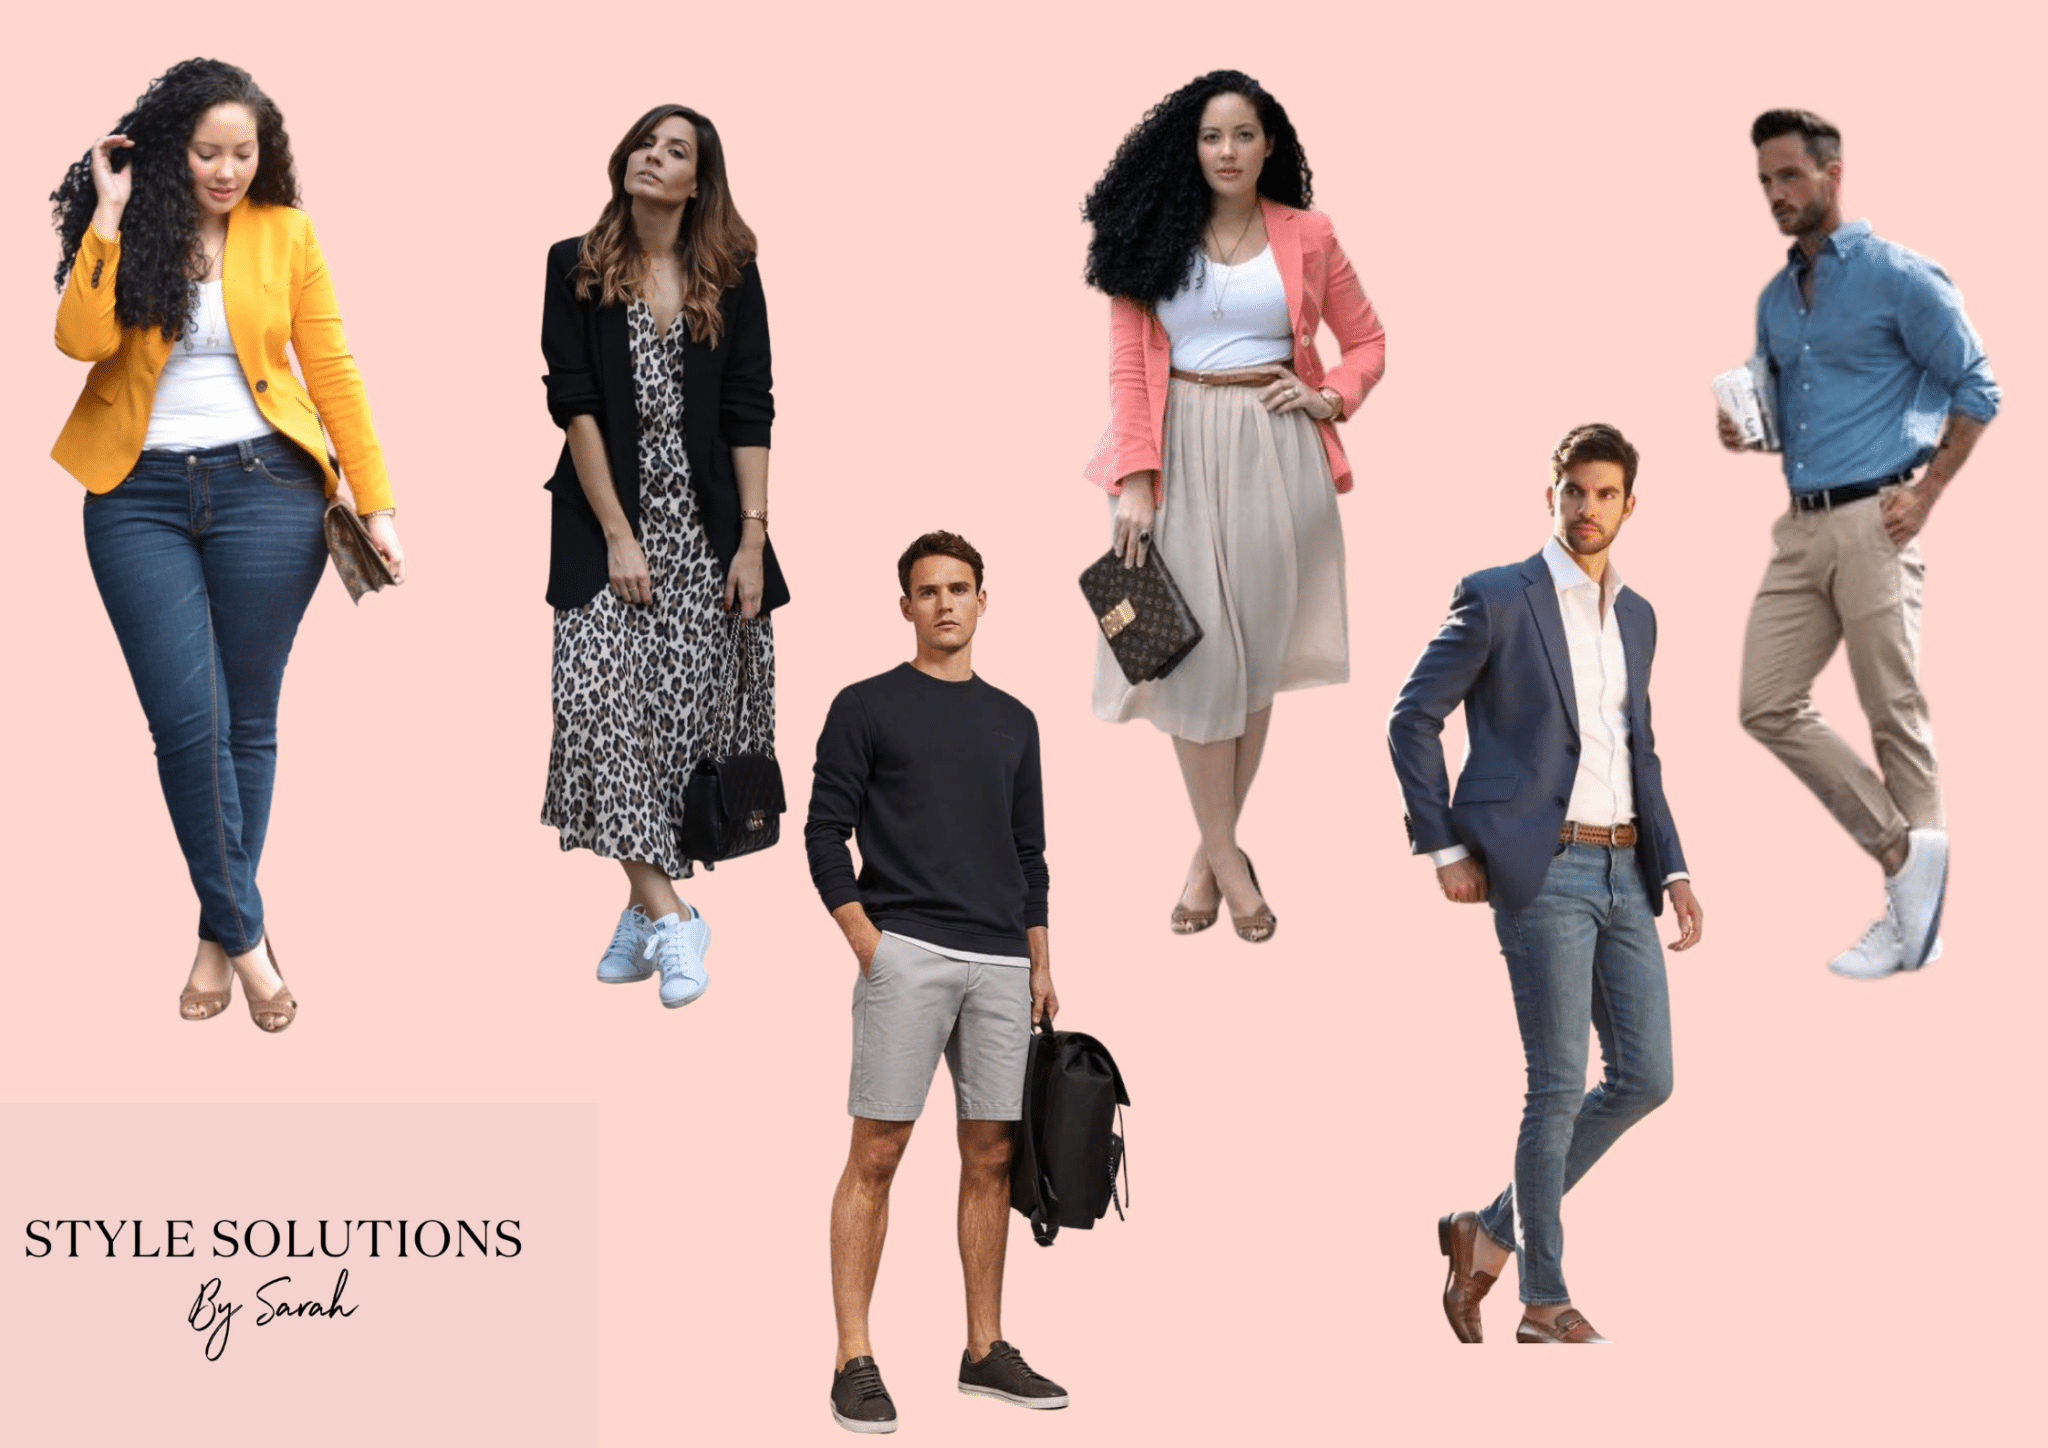 6 style tips - 3 men and 3 women dressed in smart casual clothes